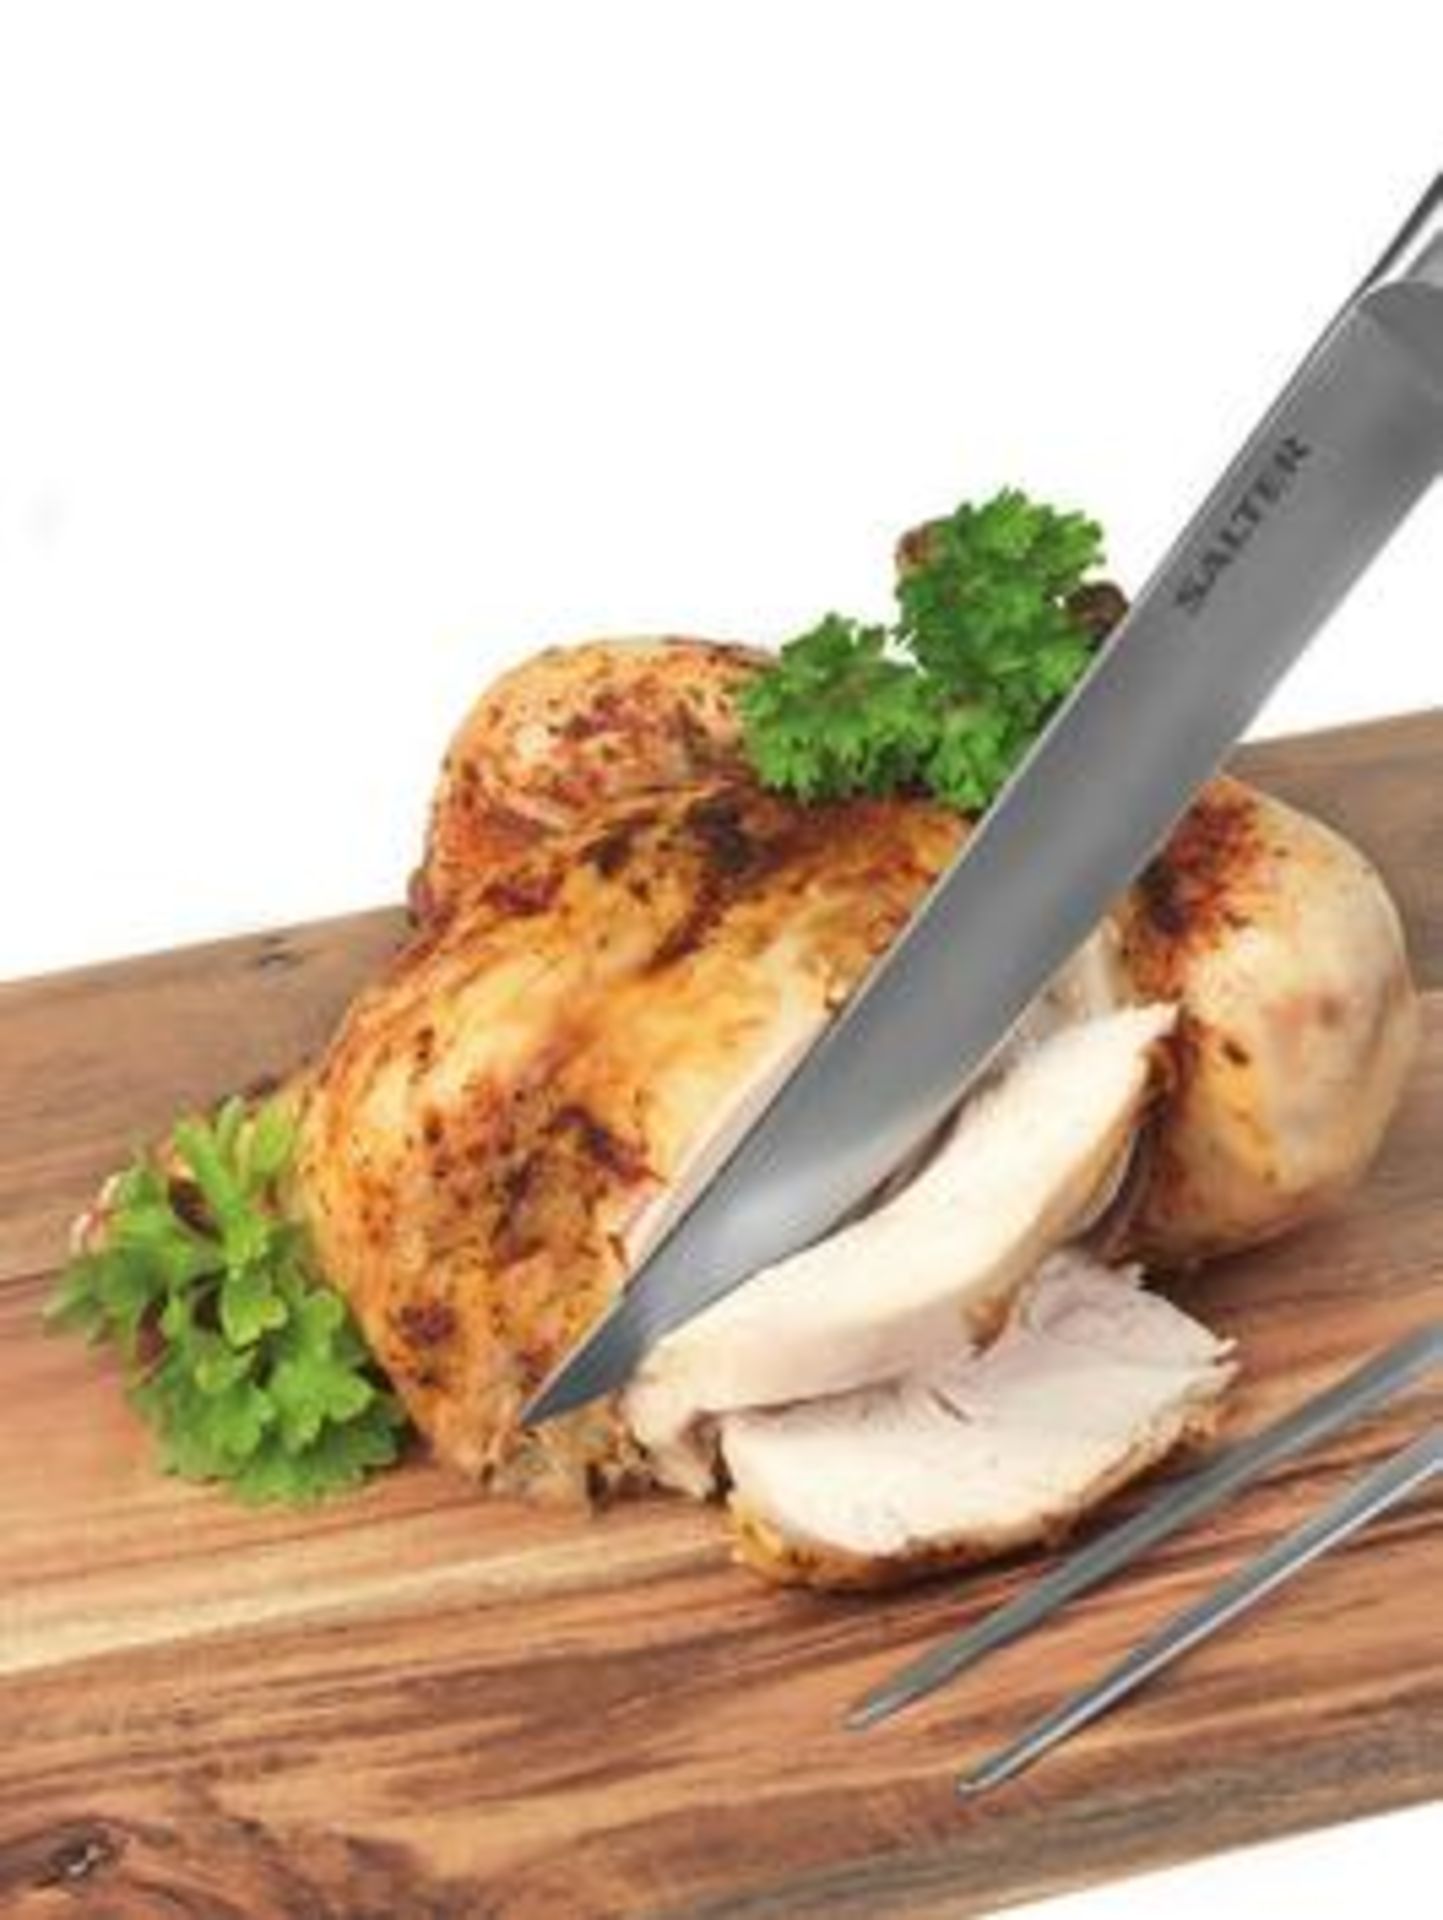 V Brand New Salter Elegance Carving Knife And Fork With Chopping Board ISP £46.99 (Mahahome.com) X 2 - Image 2 of 2